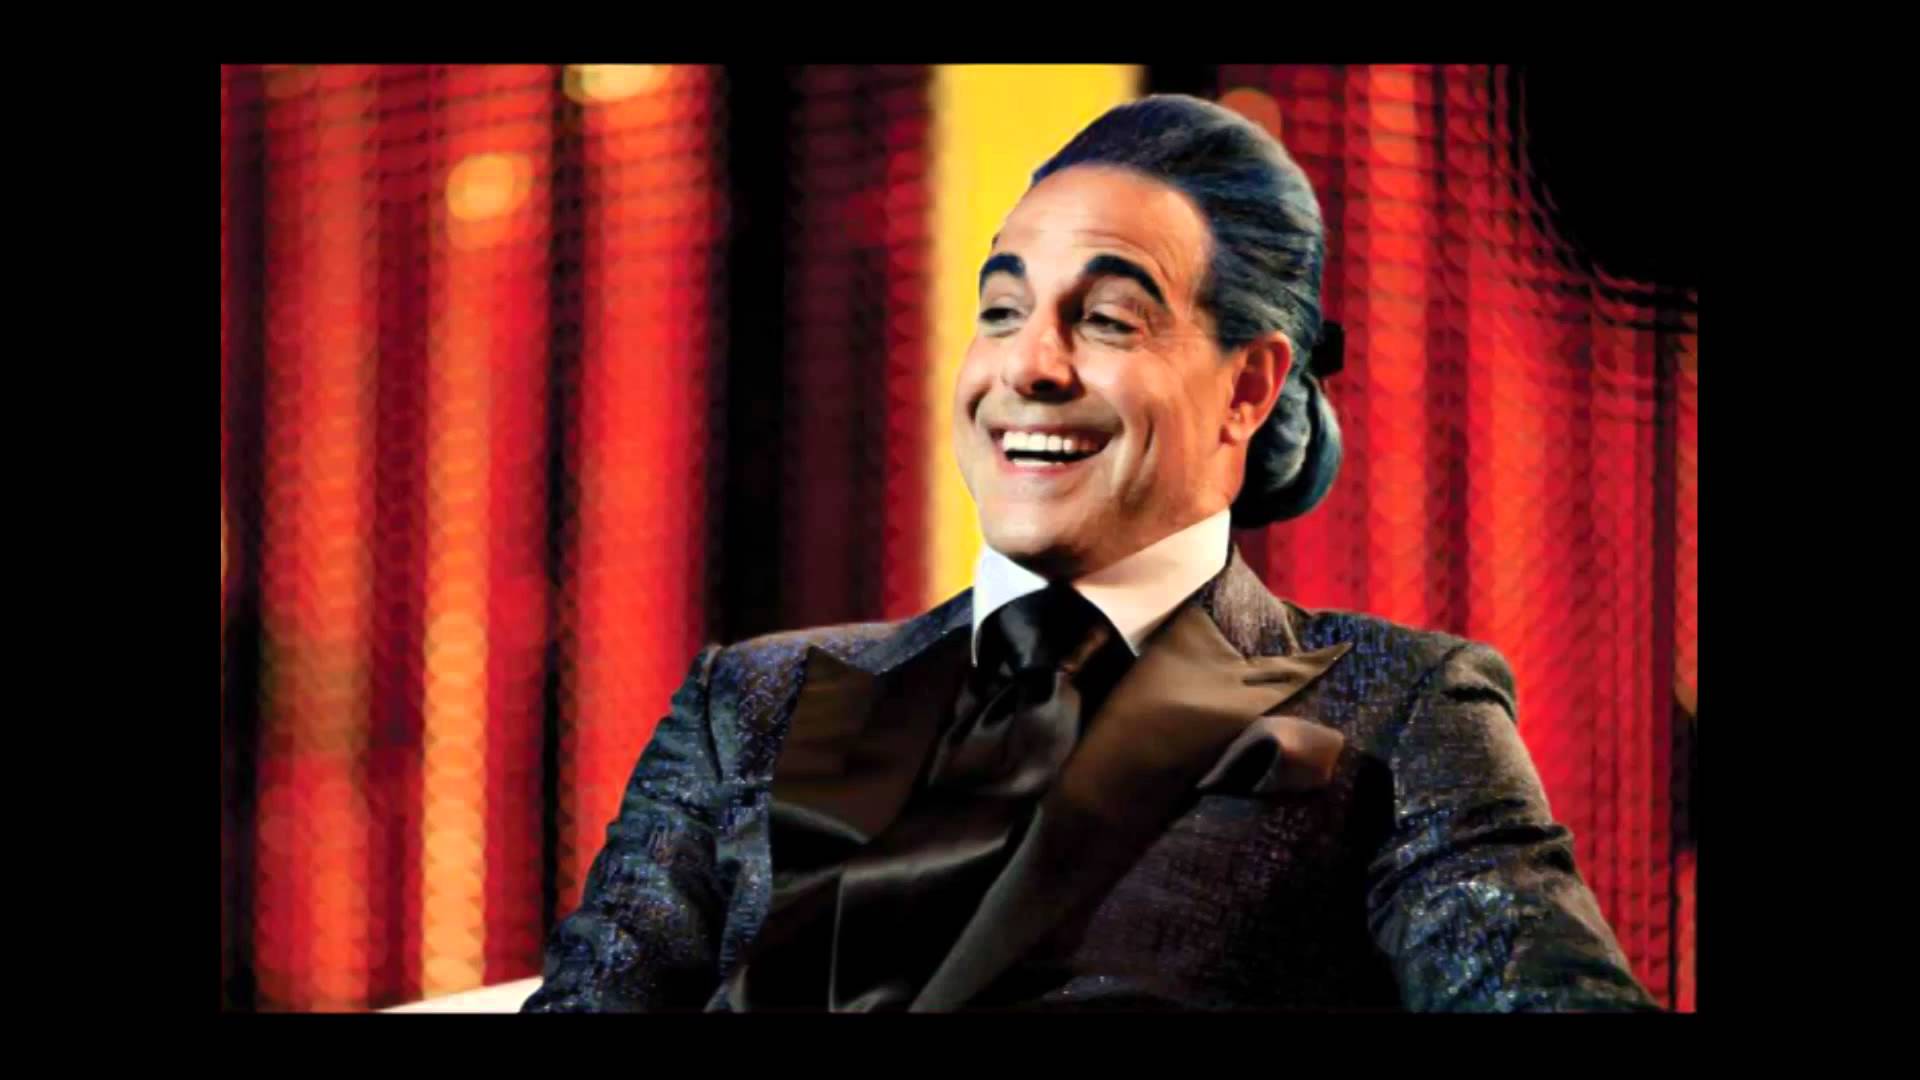 Hunger Games Flickerman (Stanley Tucci) That's funny Blank